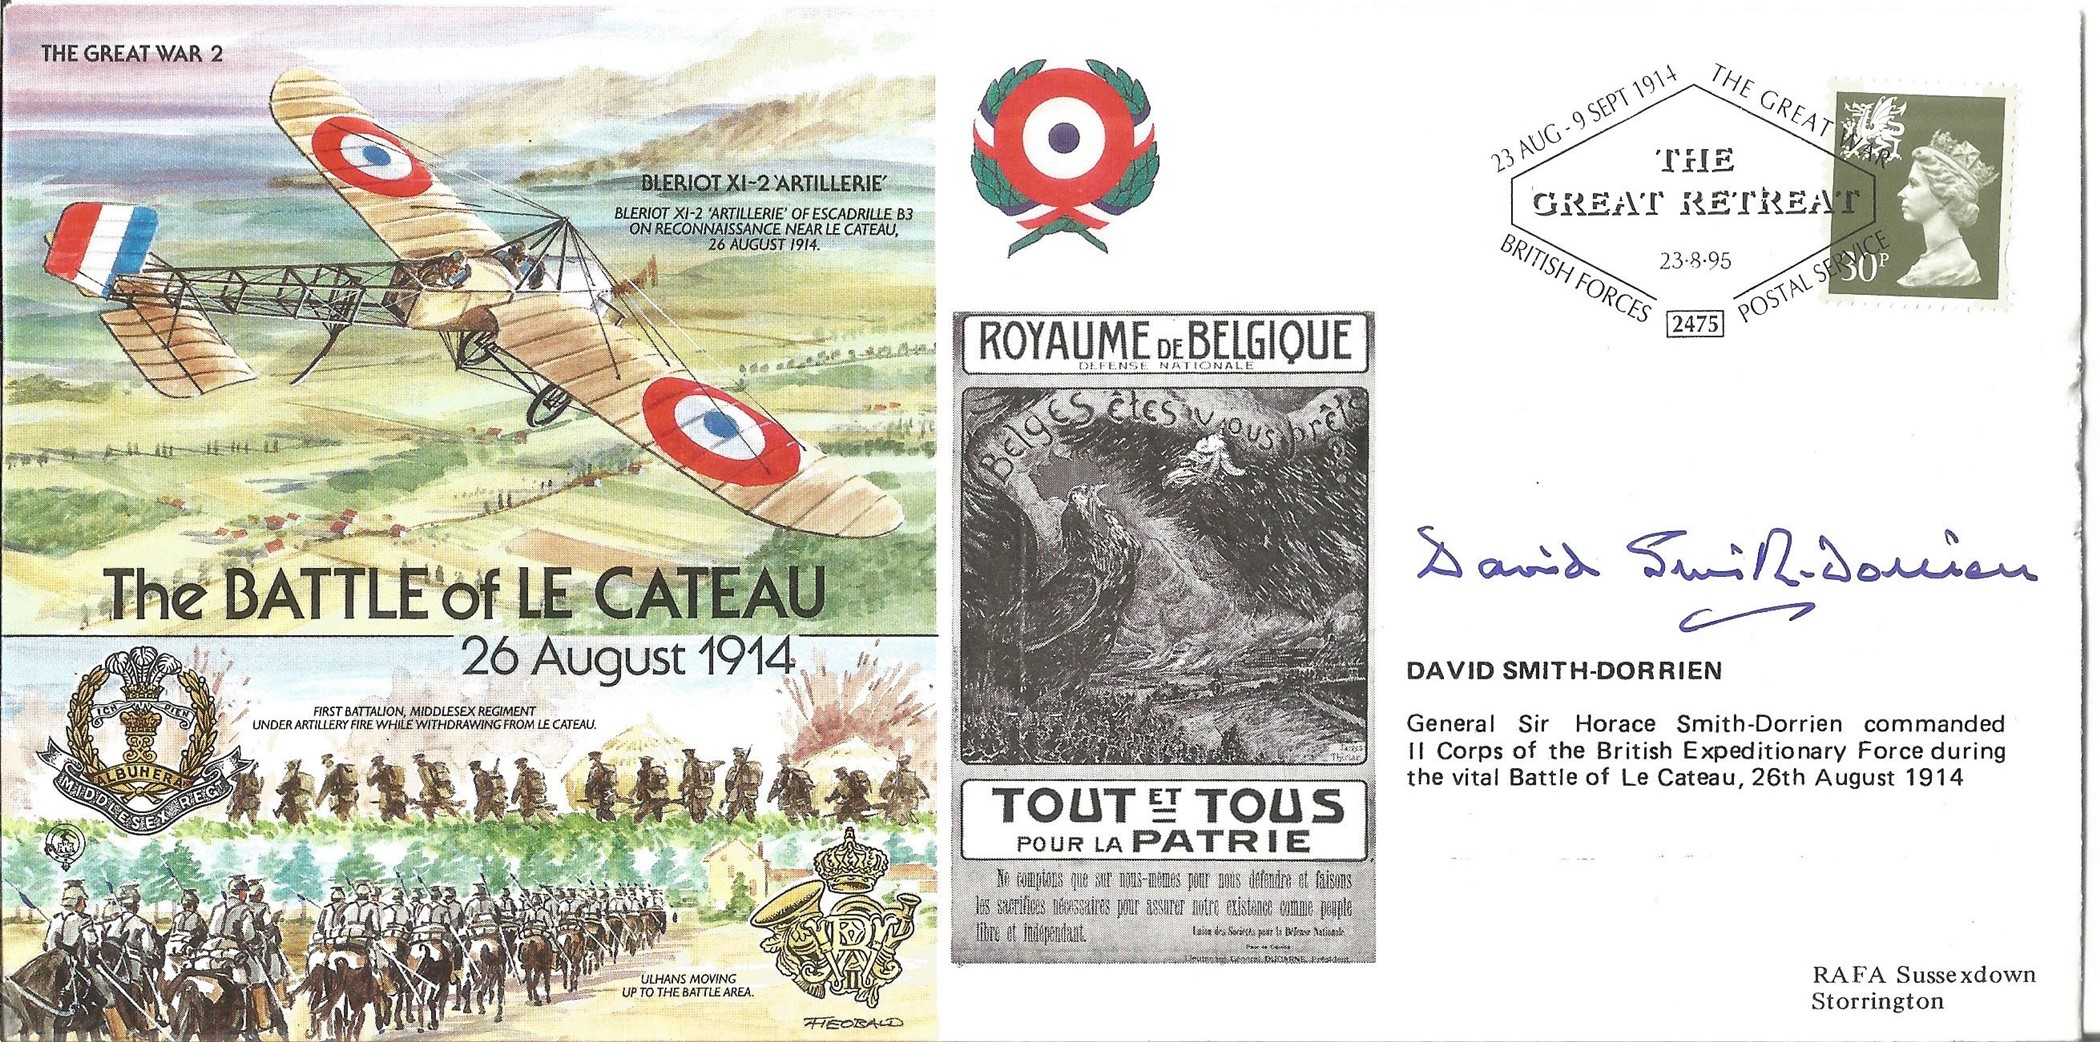 David Smith Dorrien signed FDC The Battle of Cateau 26 August 1914 No. 370 of 500. Flown in